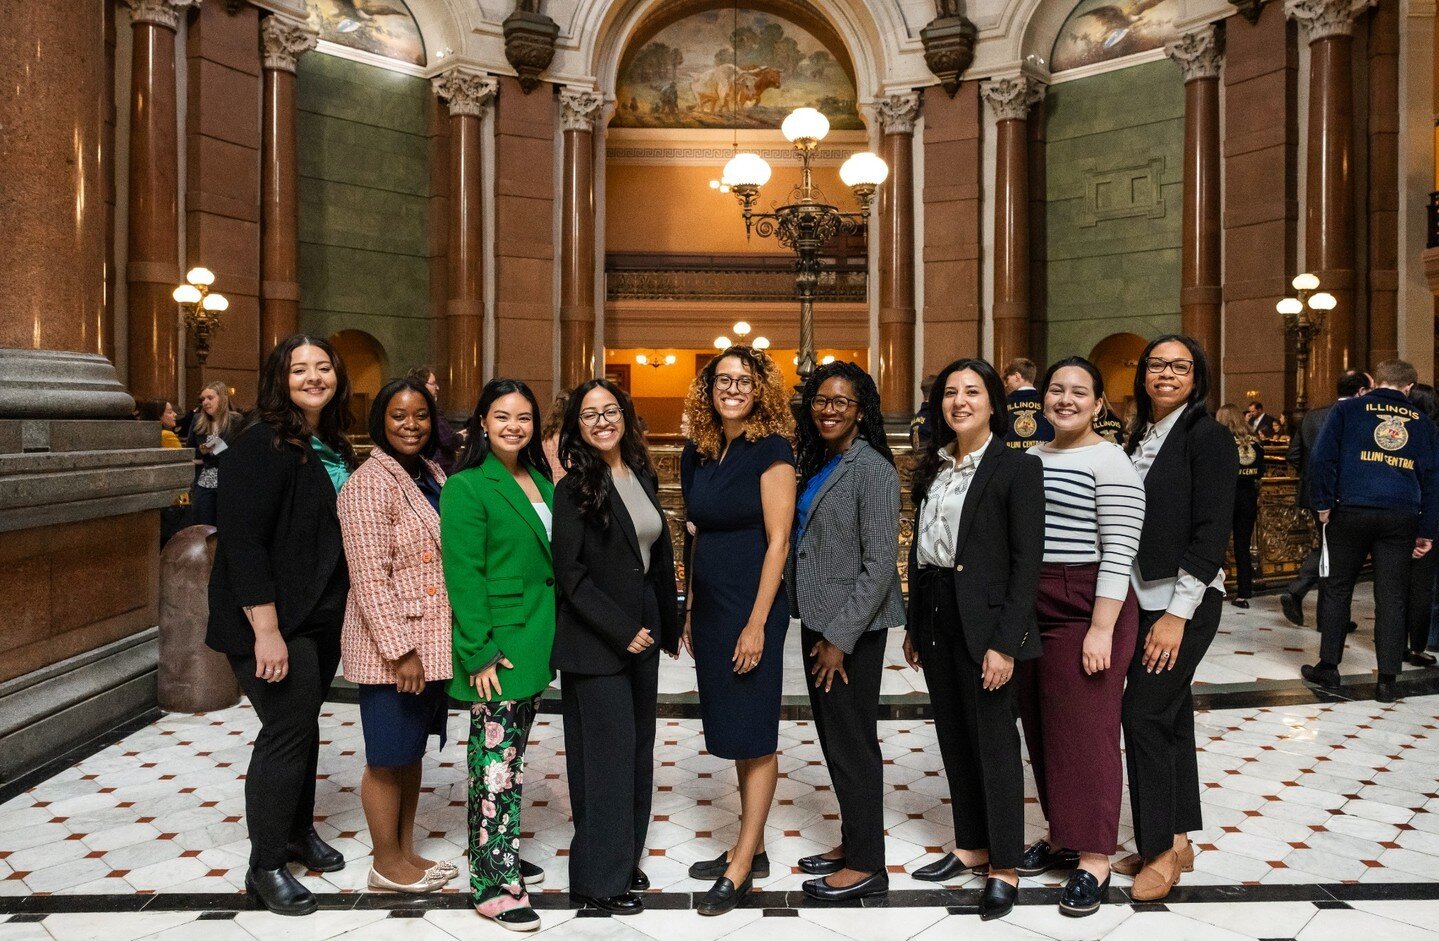 Last week, our Leaders of Color for Systems Change Fellows took a trip to Springfield to learn all about how the Capitol works! They had a sit down meeting with Senate President Harmon where they got to hear his leadership story and the values that d